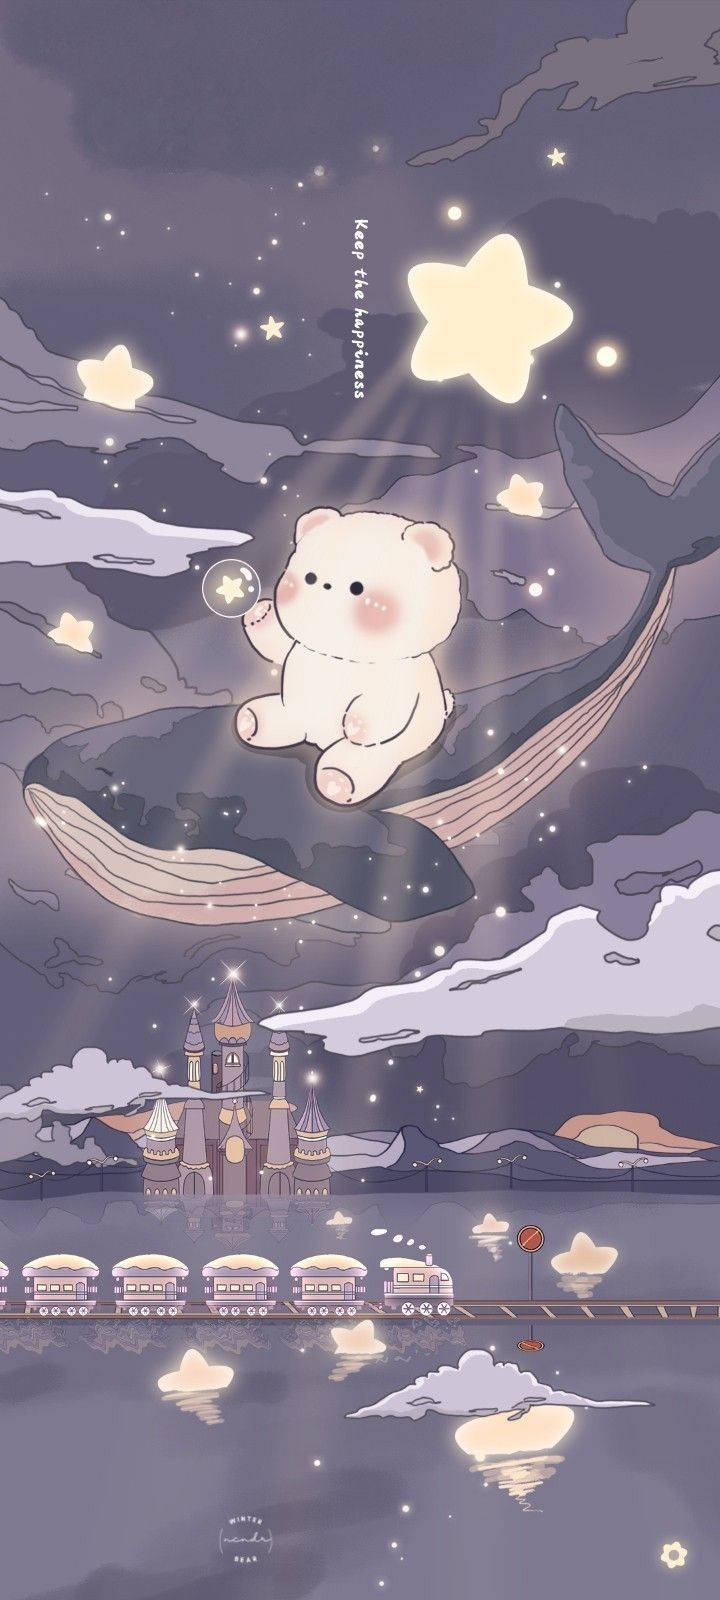 Download Cute Bear On Whale Girly Galaxy Wallpaper | Wallpapers.com